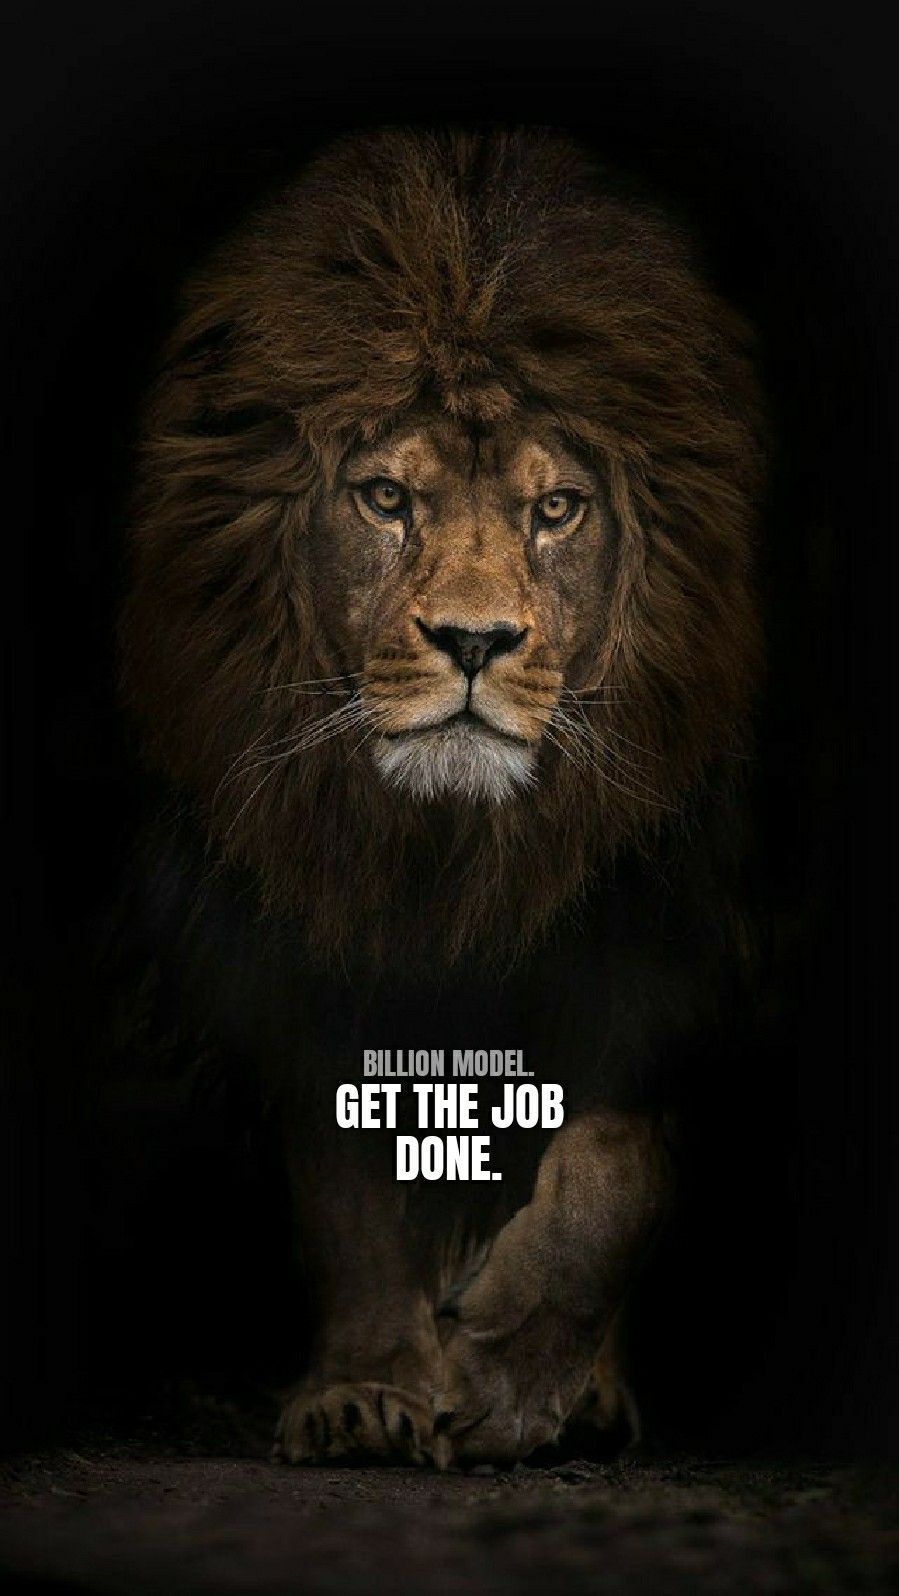 Get the job done. #lion #quotes #motivation #life. Inspirational